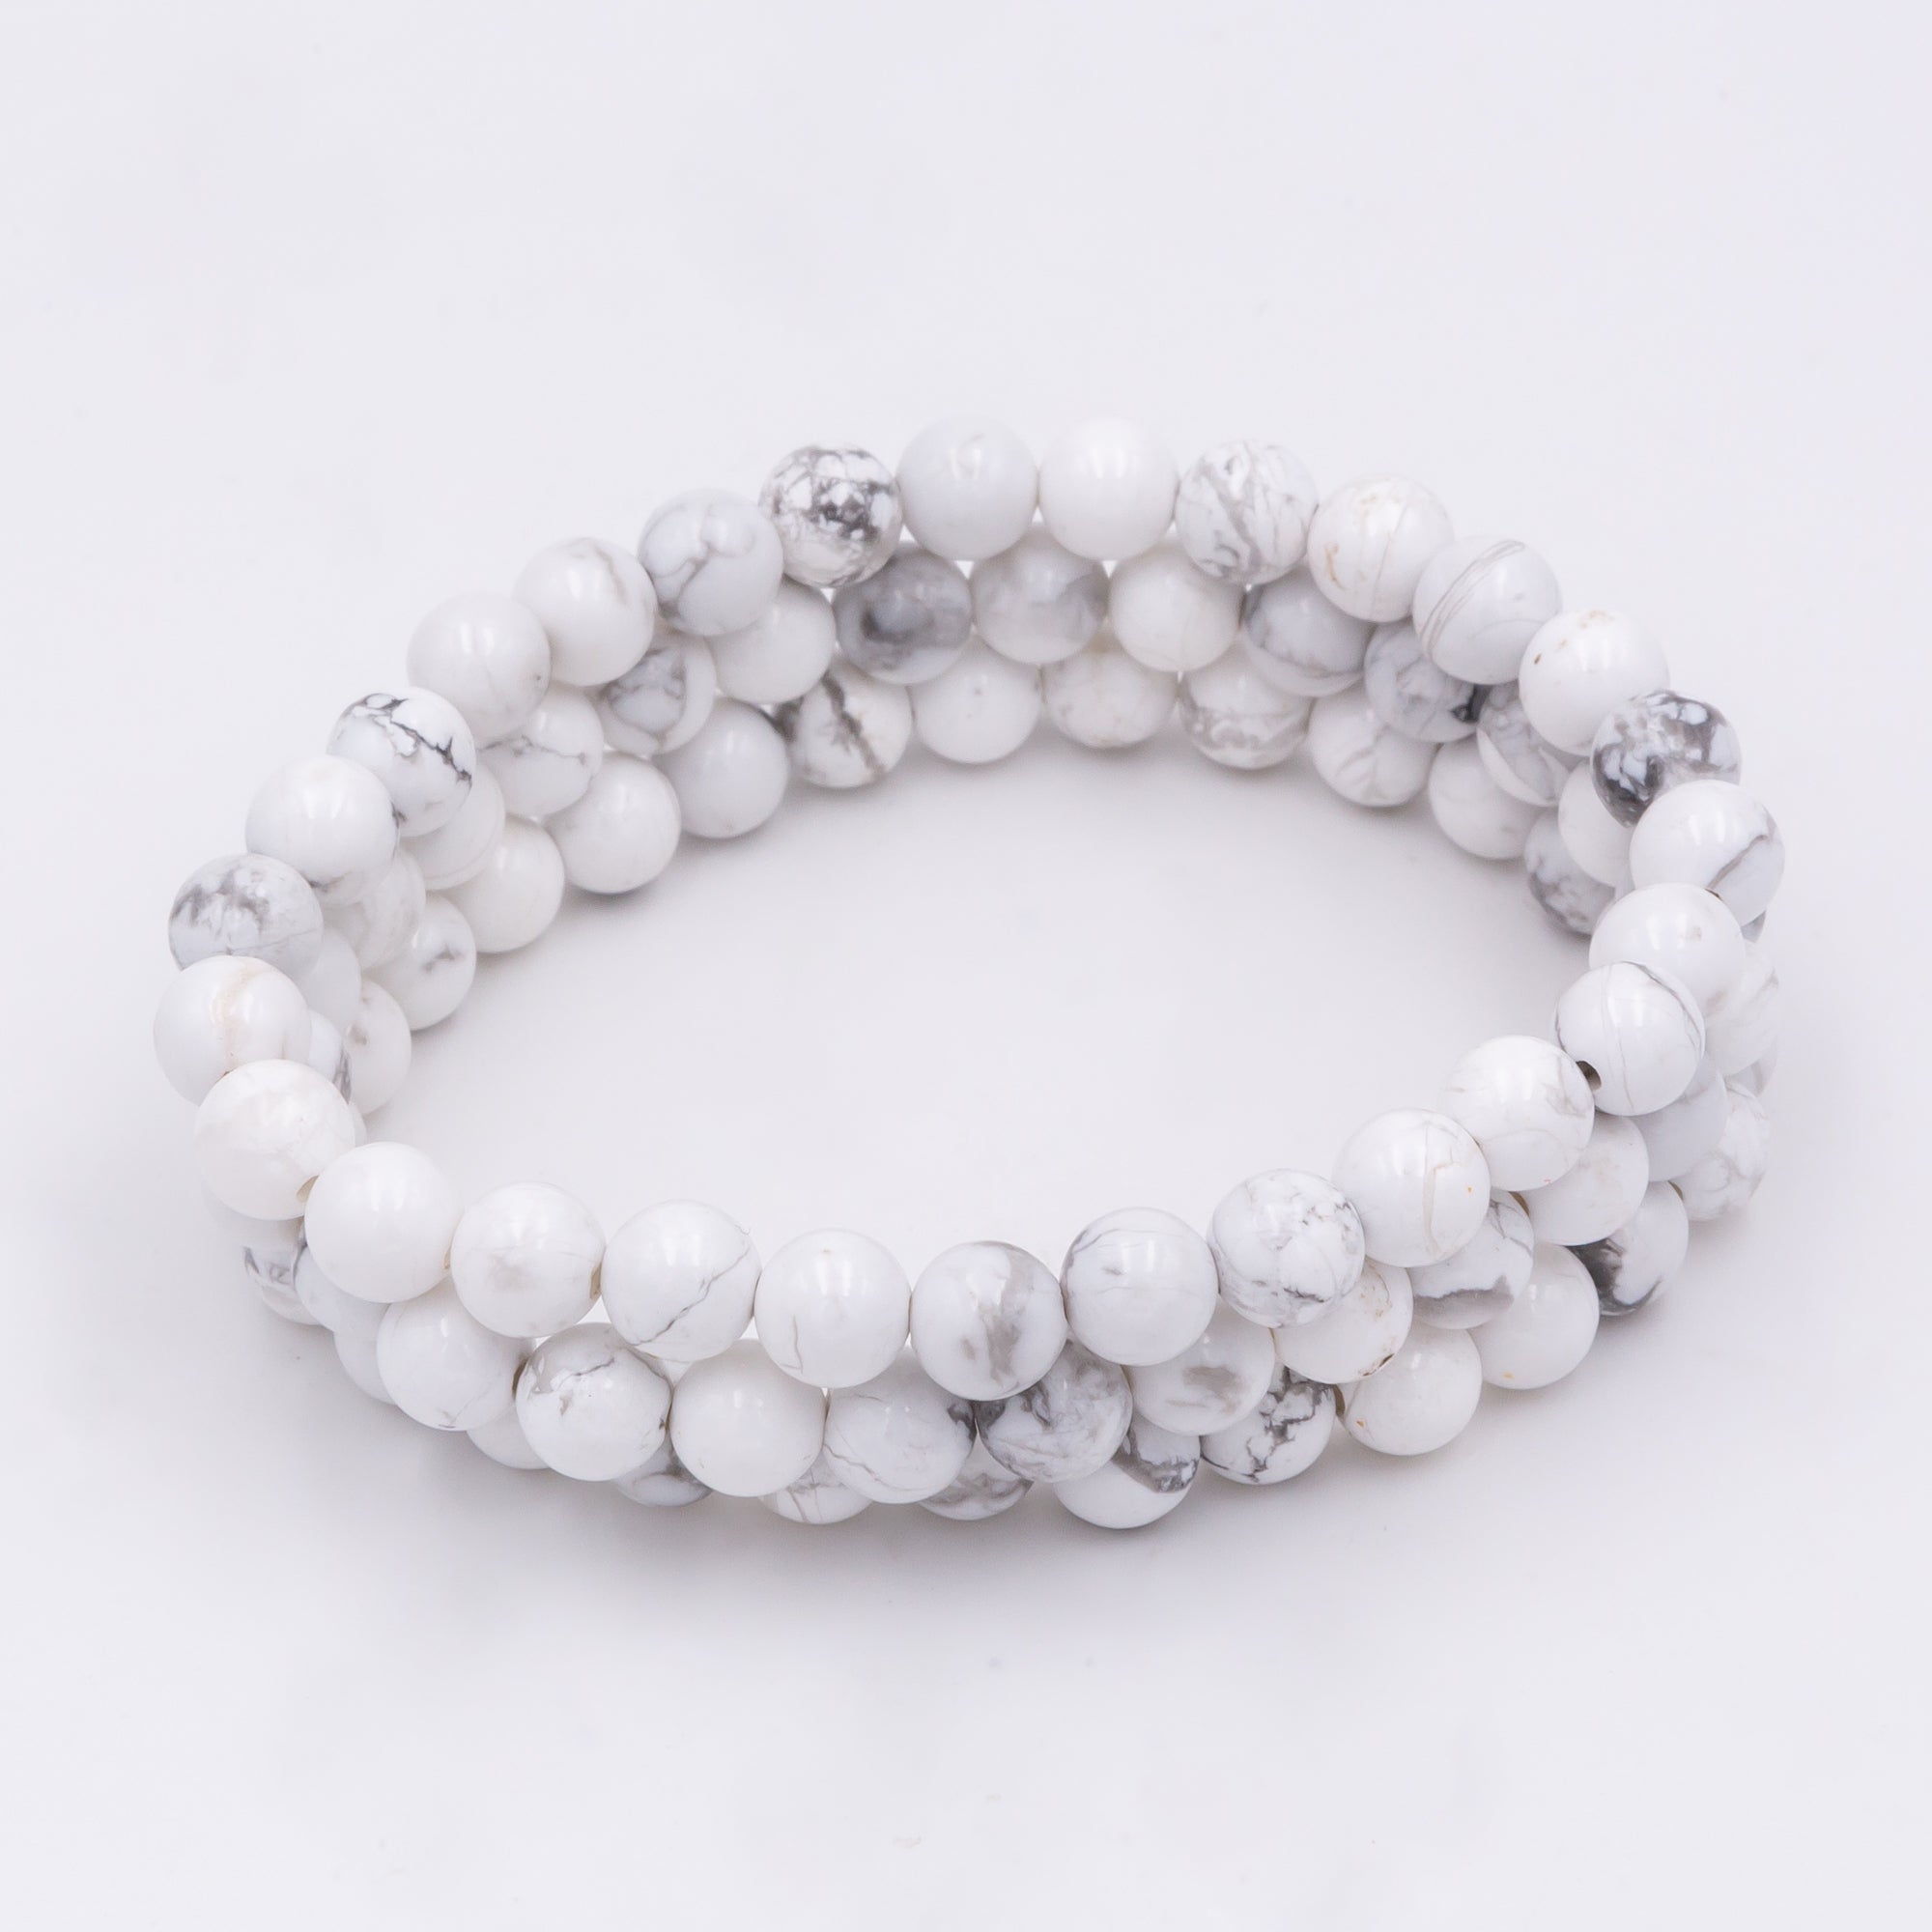 Howlite is a beautiful and unique gemstone that is often used to make  bracelets.. Rudraksha beads of Nepal is used as mala, bracelet & worn for  health and disease cure benefits